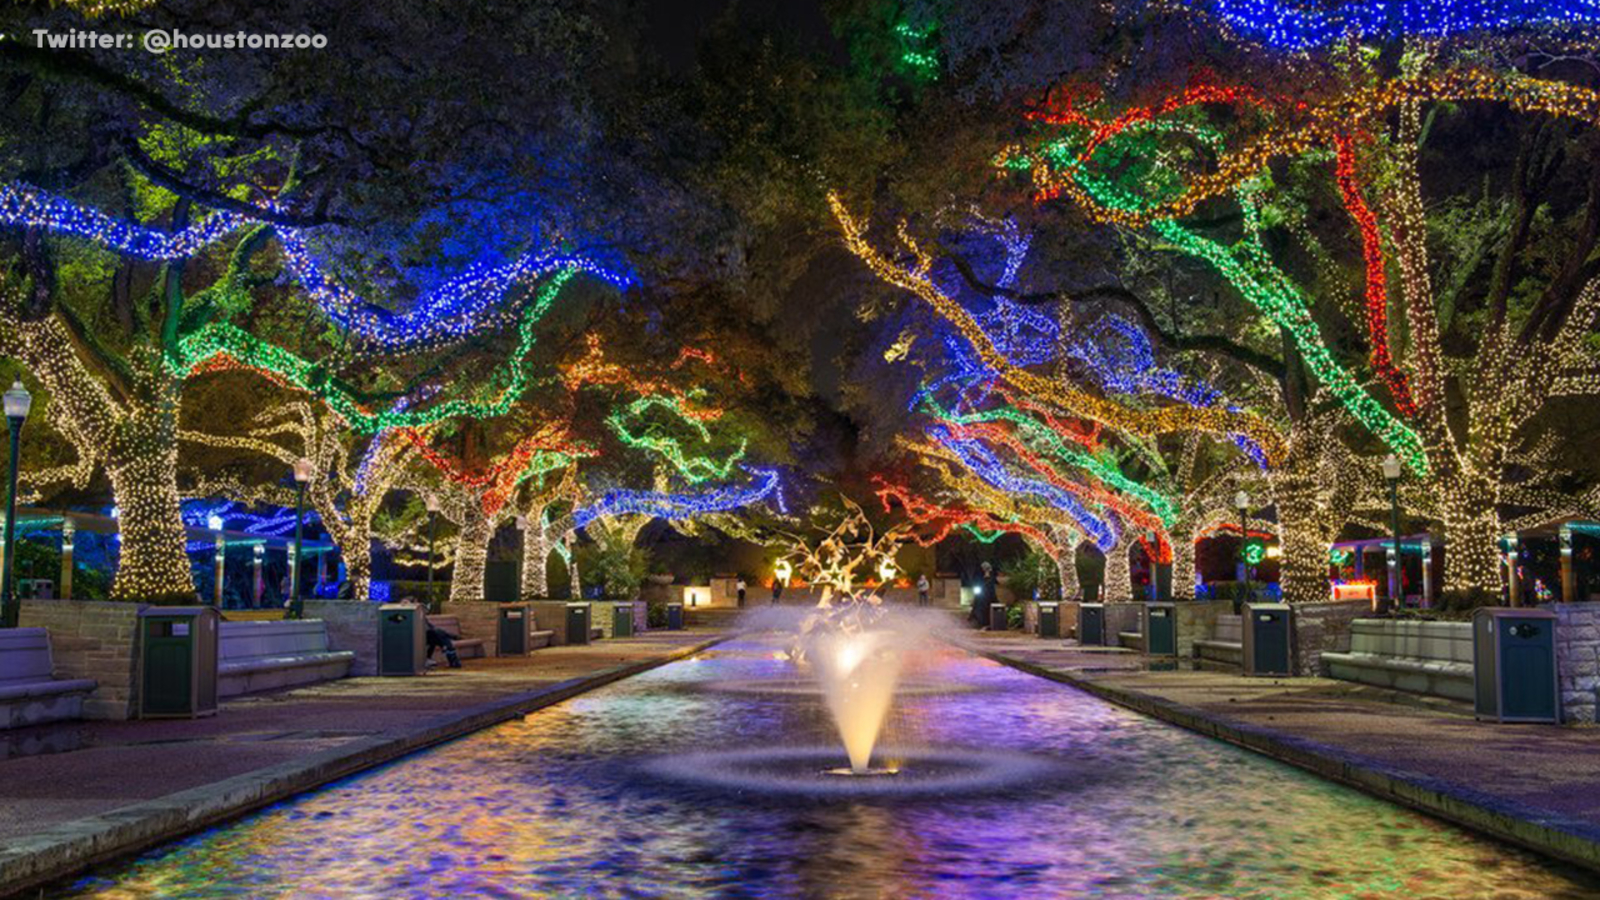  Inclement weather conditions forces Houston Zoo to cancel light show on Black Friday 